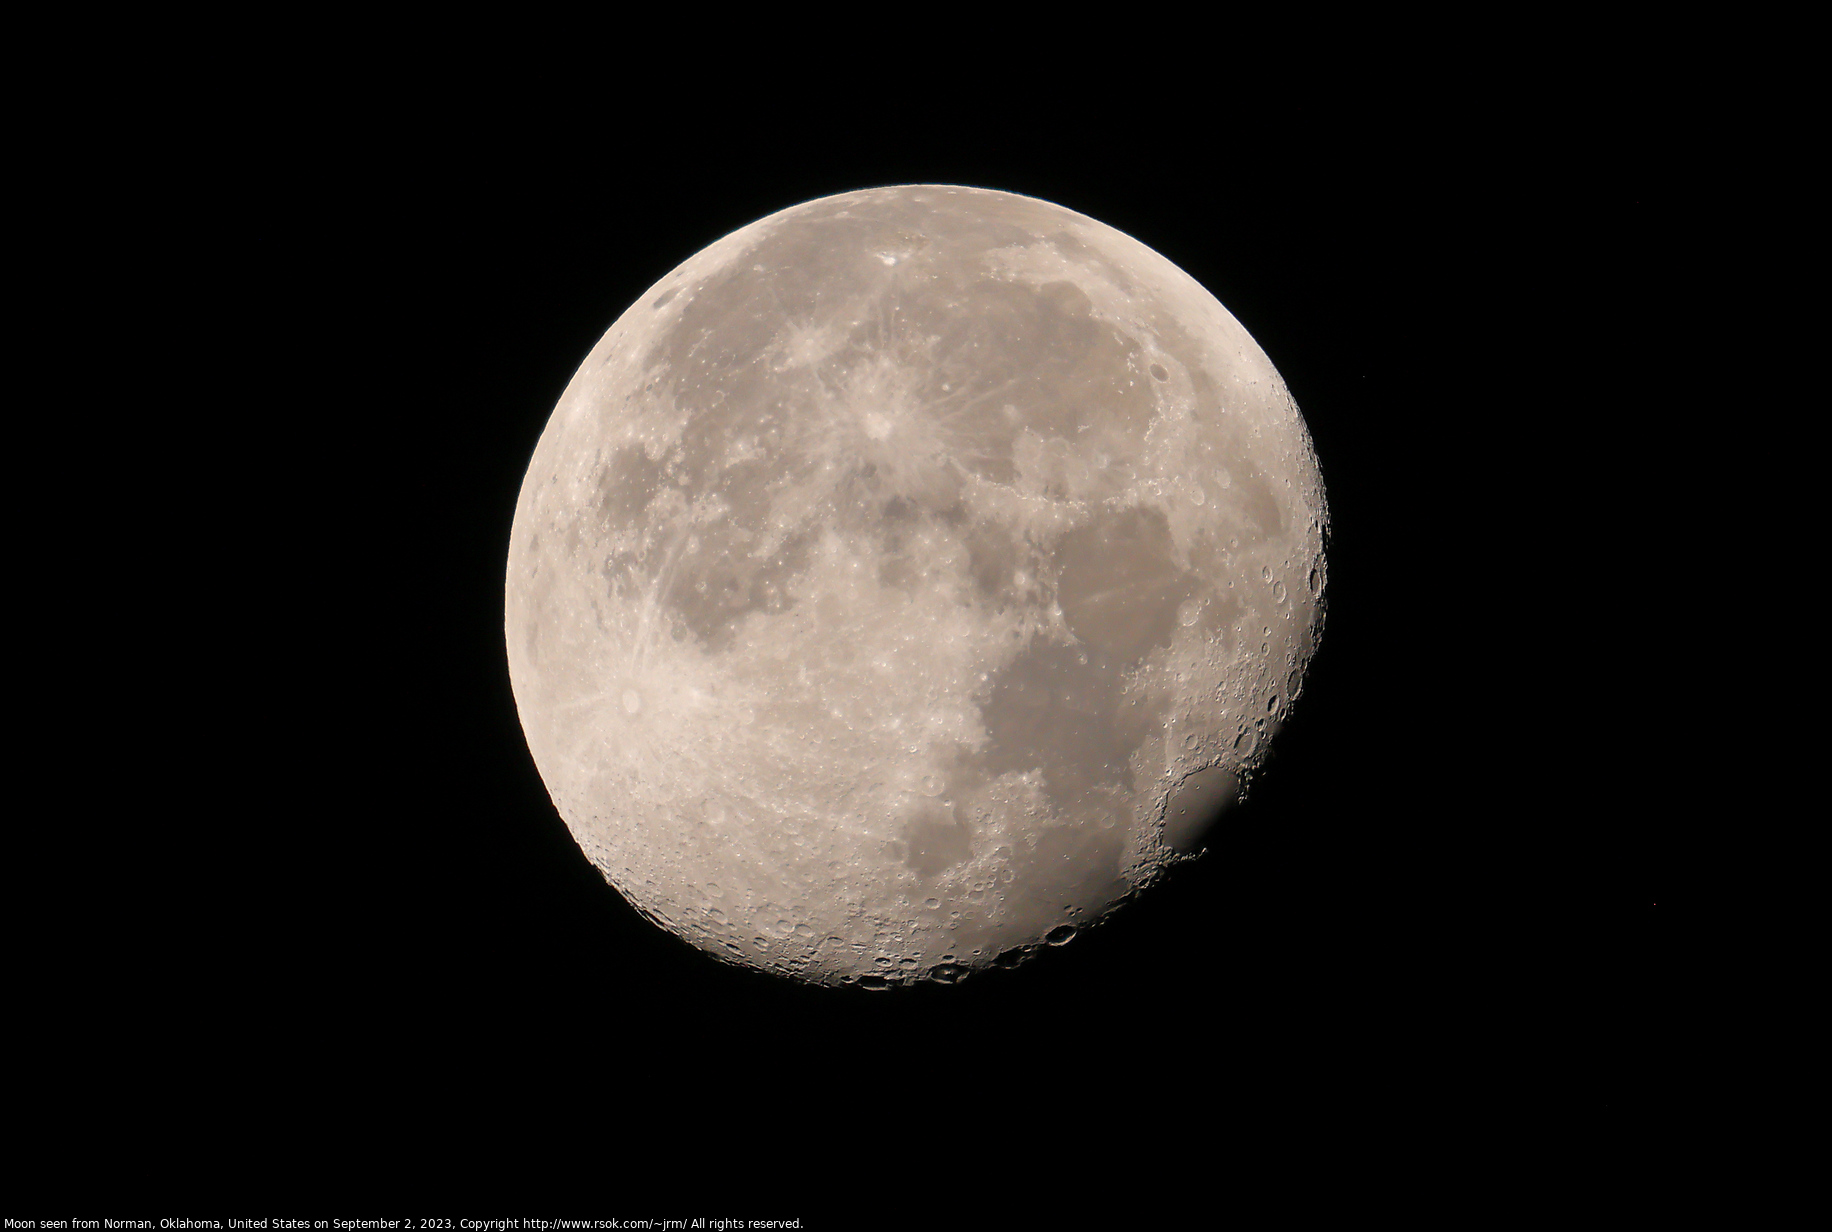 Moon seen from Norman, Oklahoma, United States on September 2, 2023